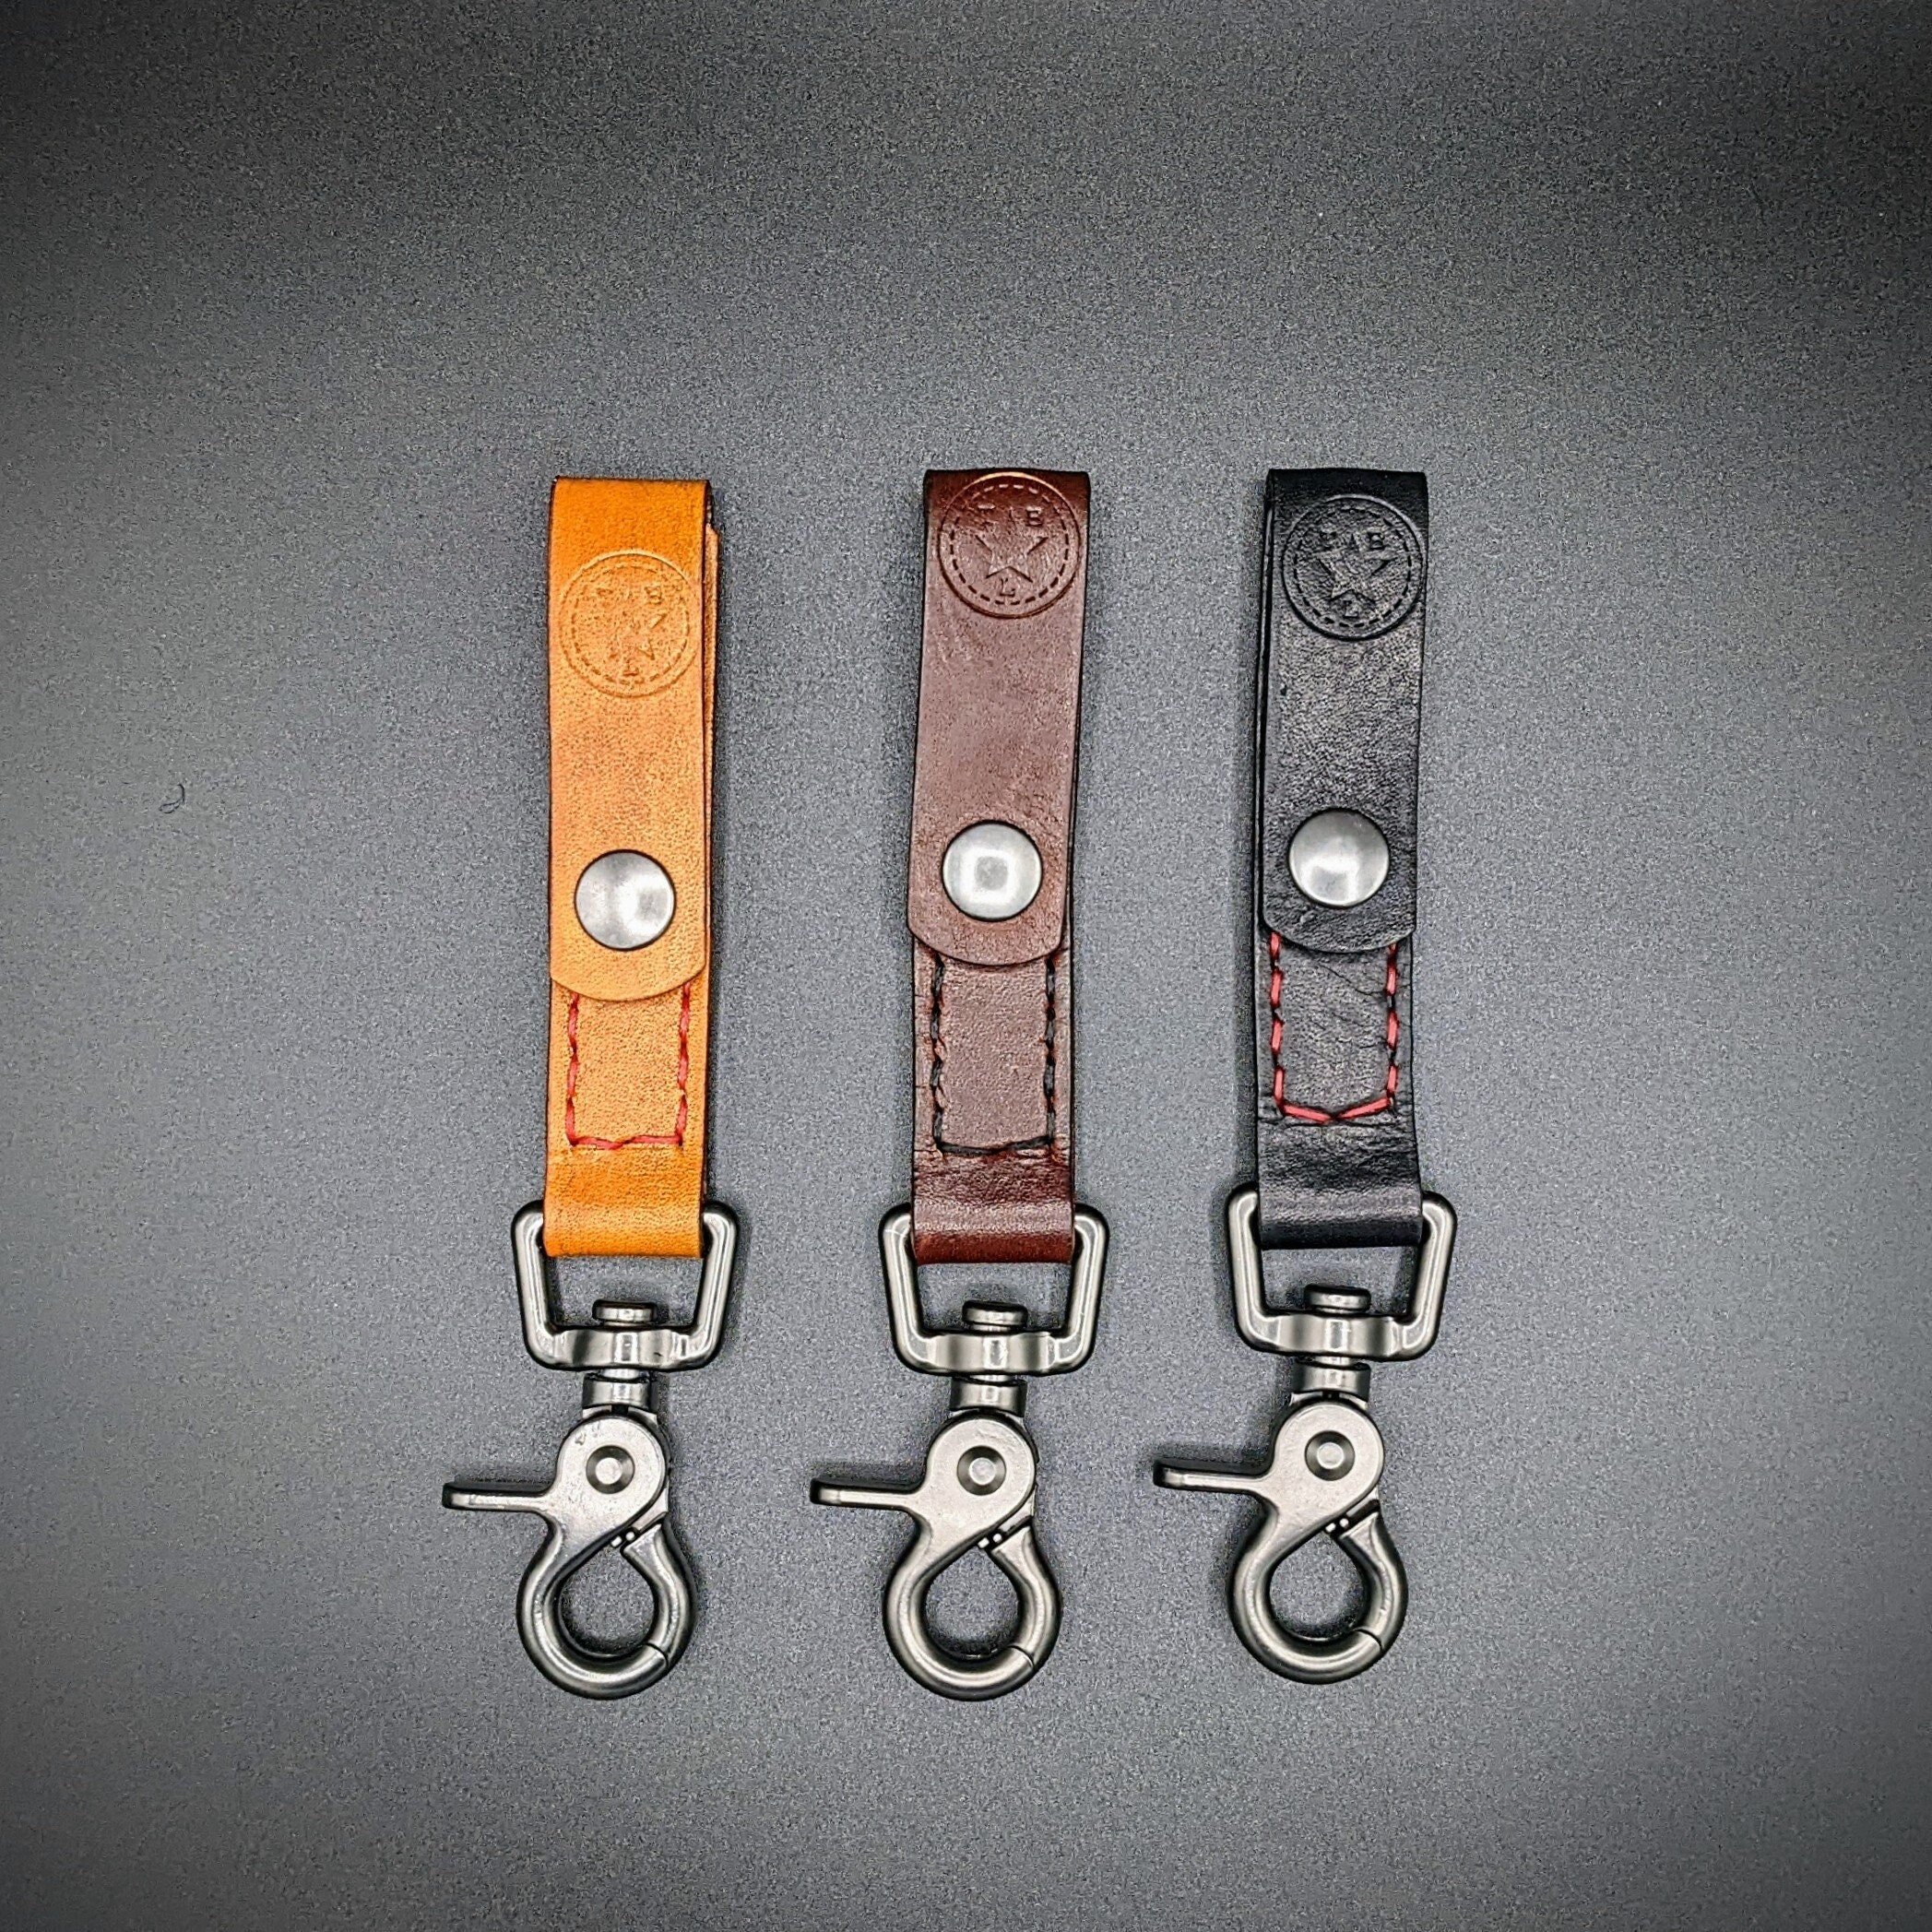 Bright Colors Key Keeper Ring Leather Key Chain Snap Holds Over 3 Key Rings  Valet With Ease, Only Give Your Car Keys 